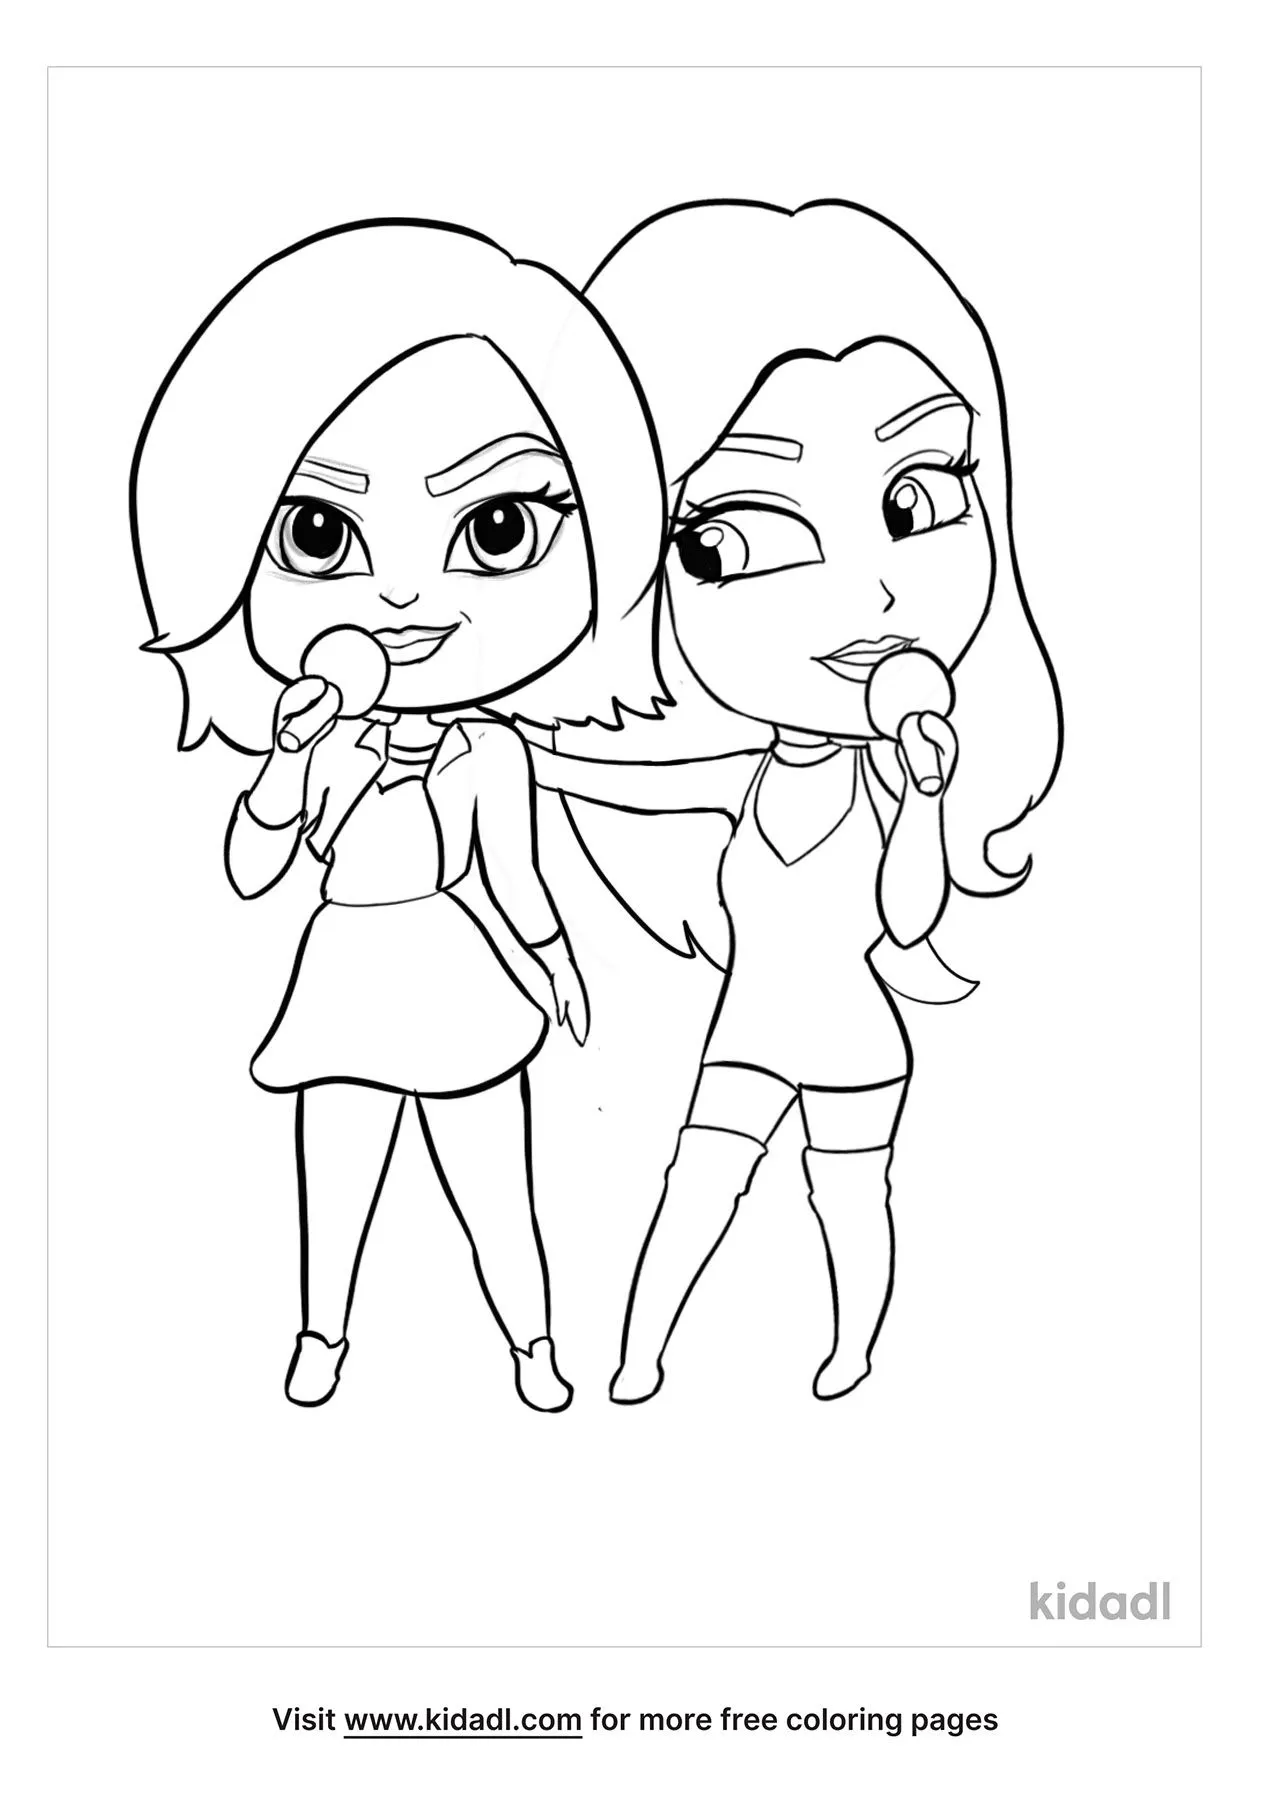 Free selena gomez and demi lovato coloring page coloring page printables